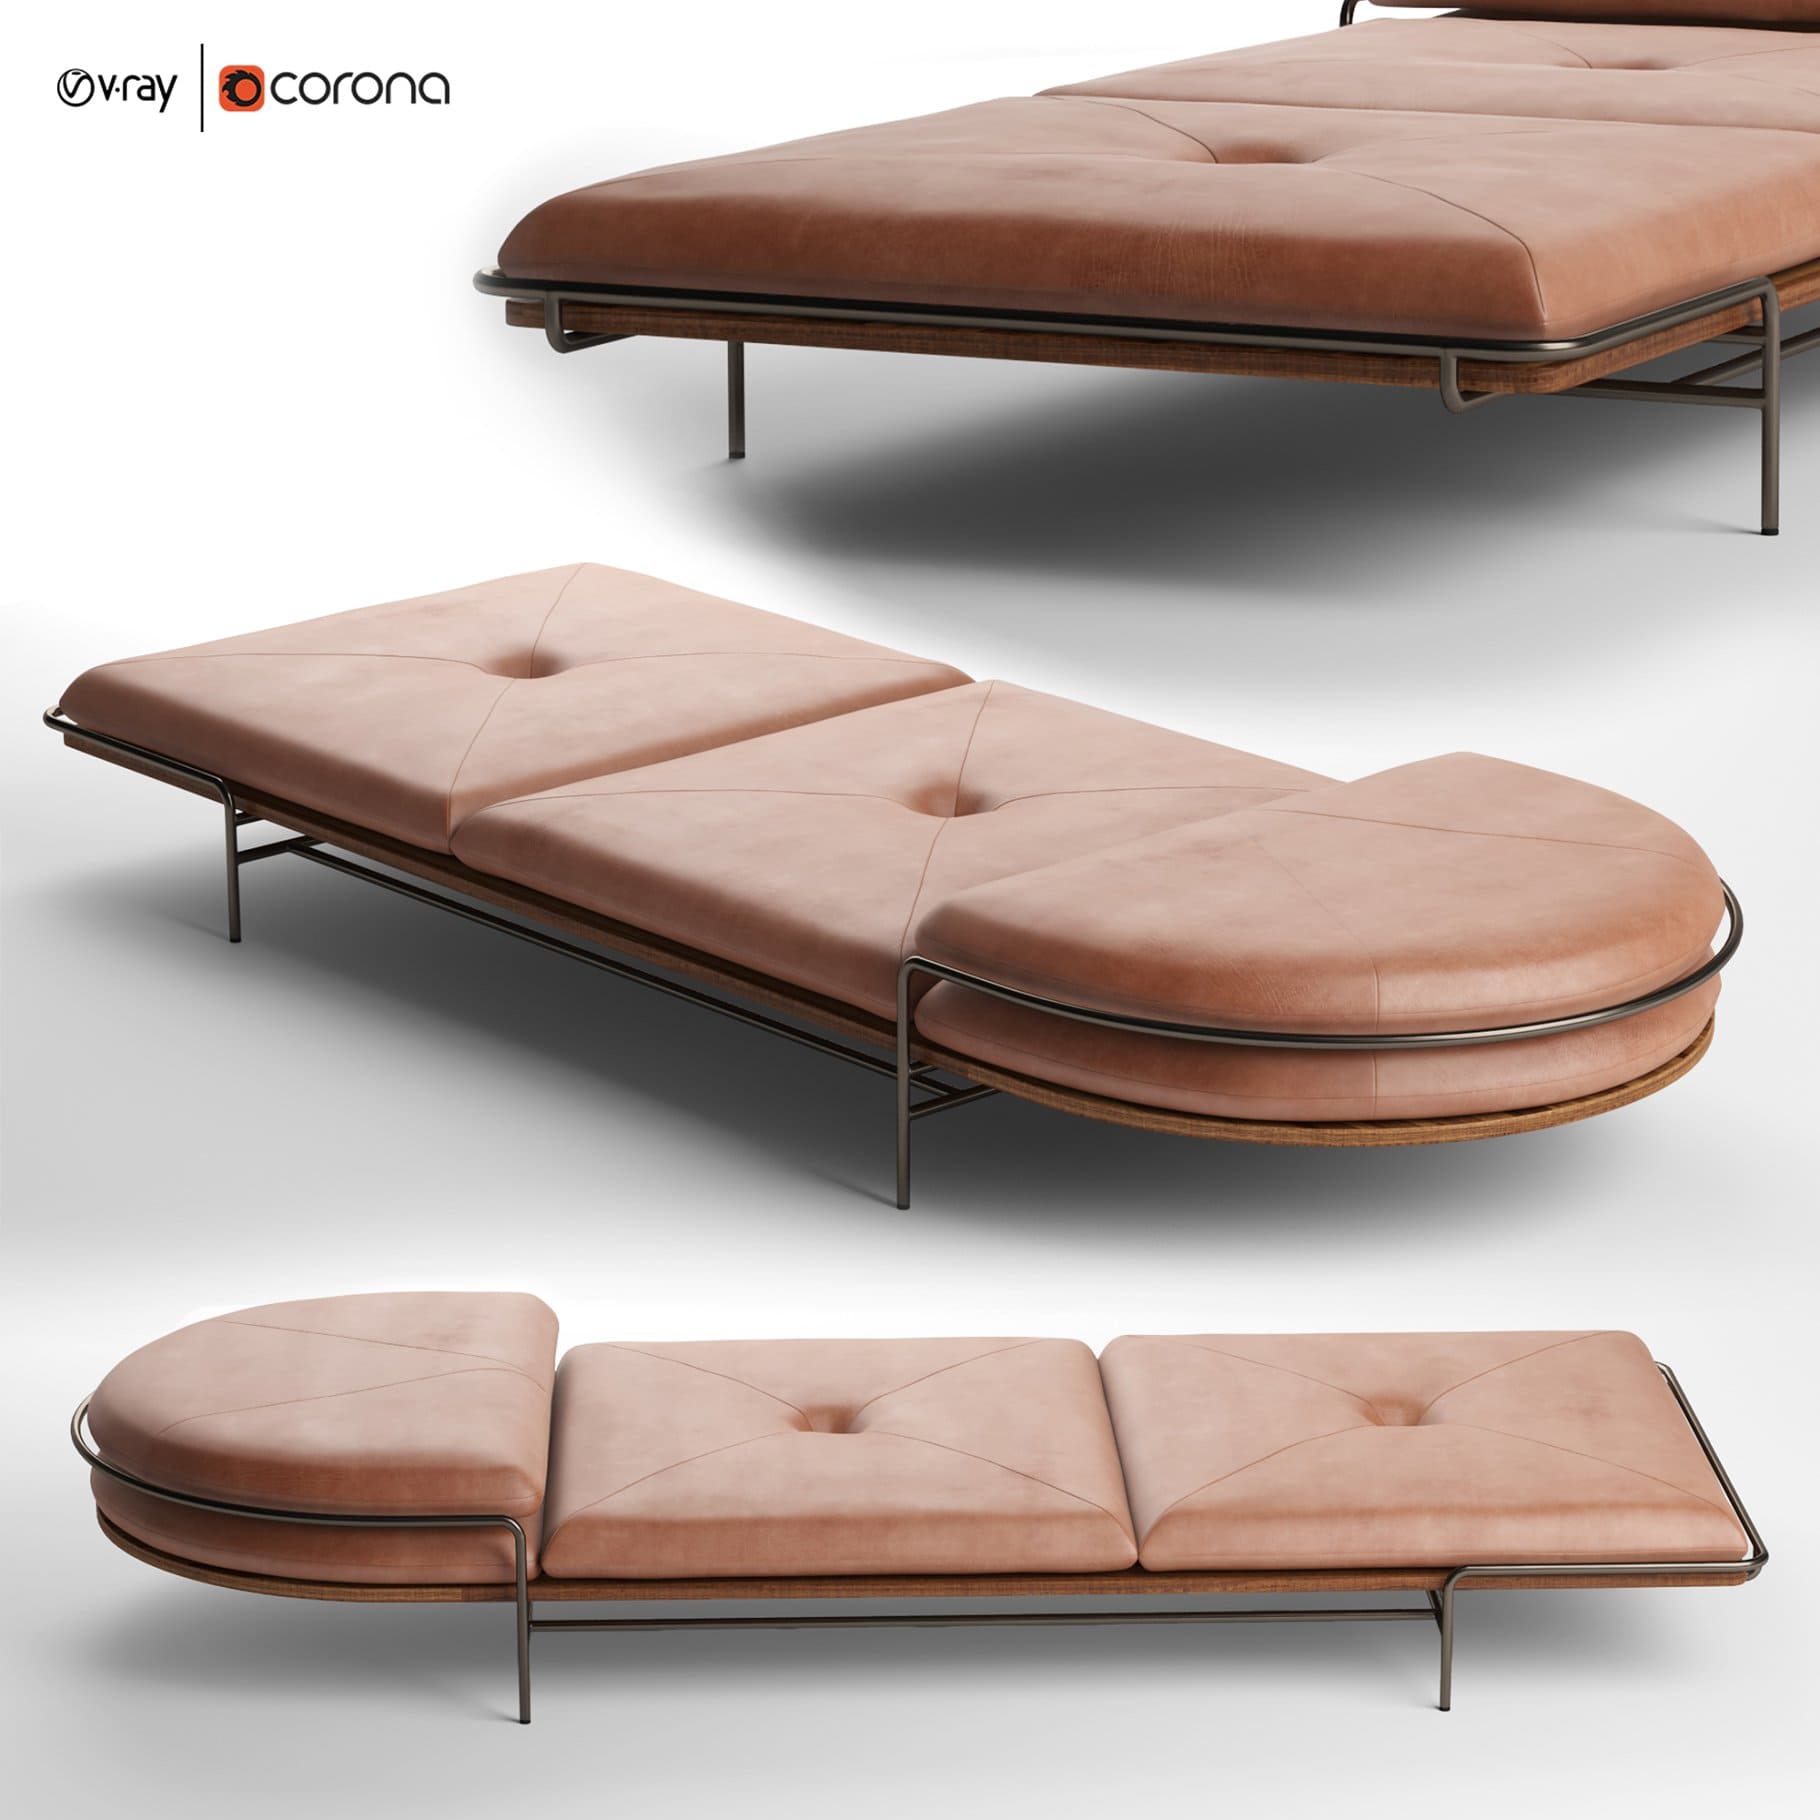 Geometric daybed by bassam fellows, main picture.